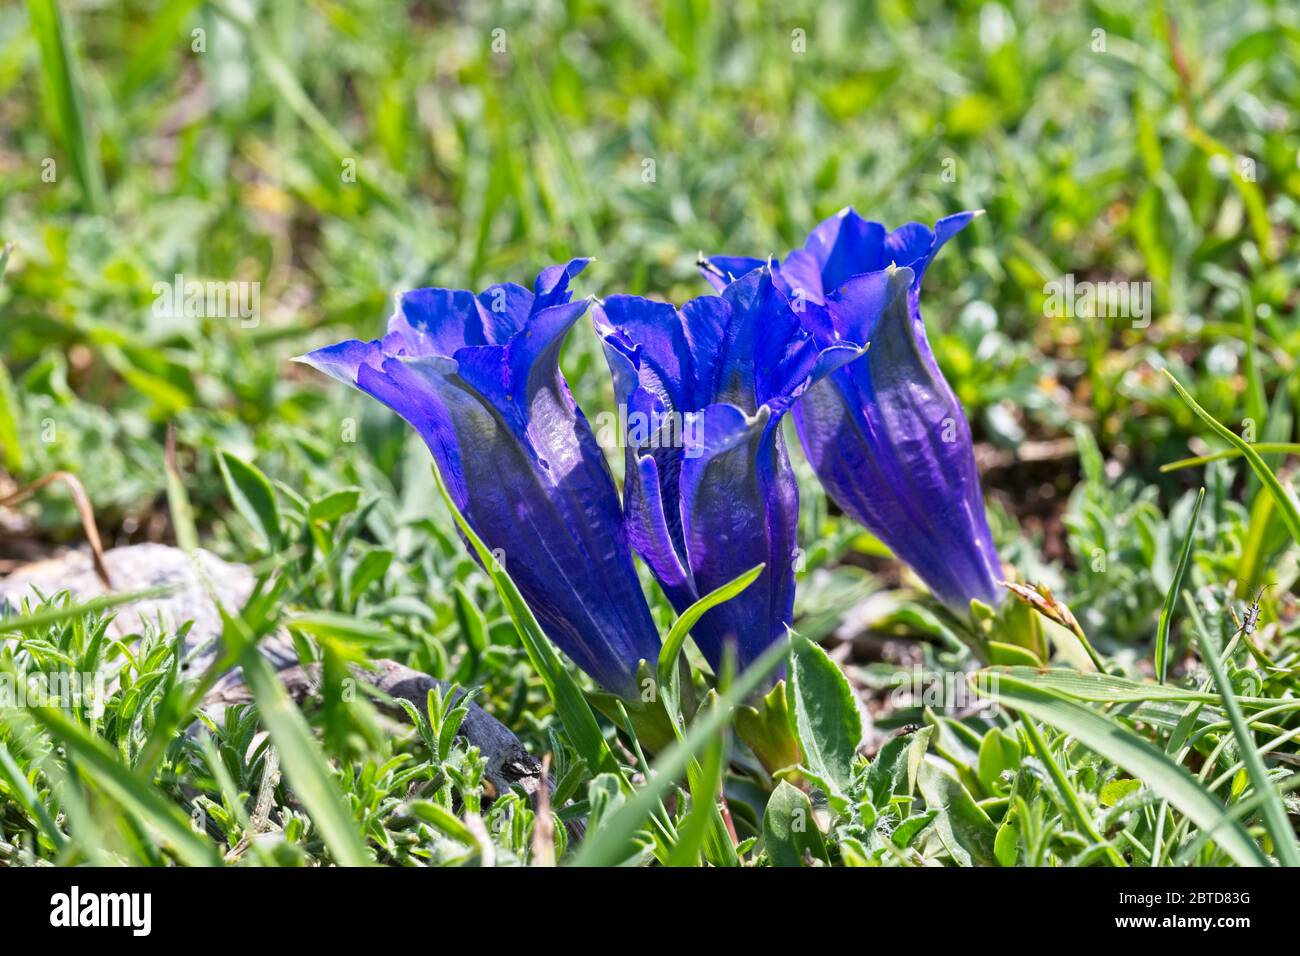 The beautiful blue flowers of Clusius Gentian (Gentiana clusii) found flowering up in the Picos de Europa, Cantabria, Spain. Stock Photo